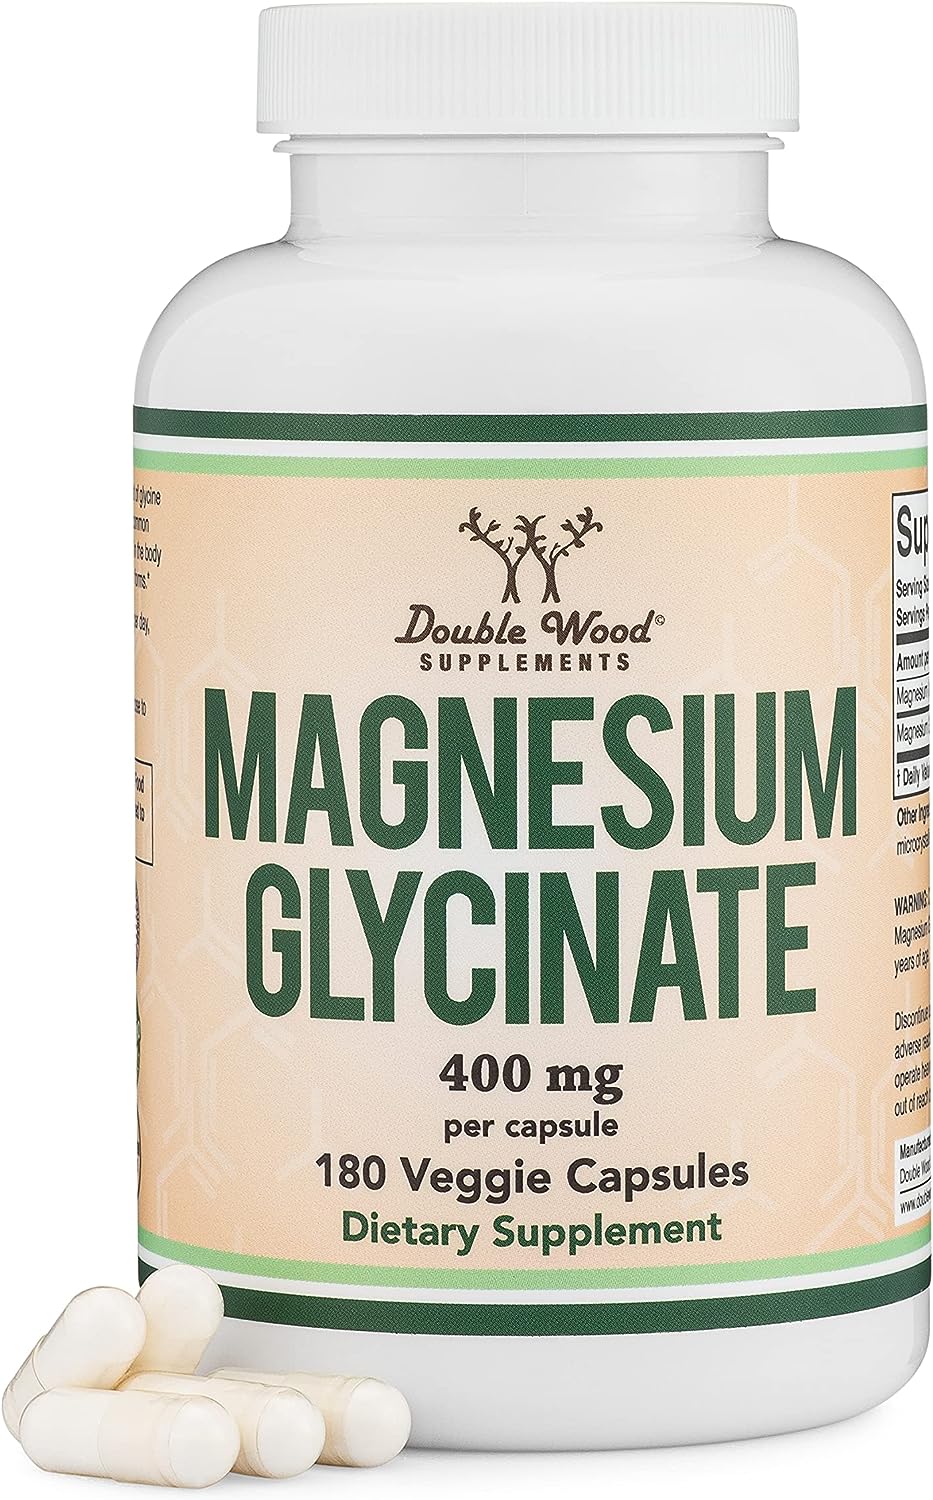 Double Wood Supplements Magnesium Glycinate 400mg, 180 Capsules (Vegan Safe, Manufactured and Third 